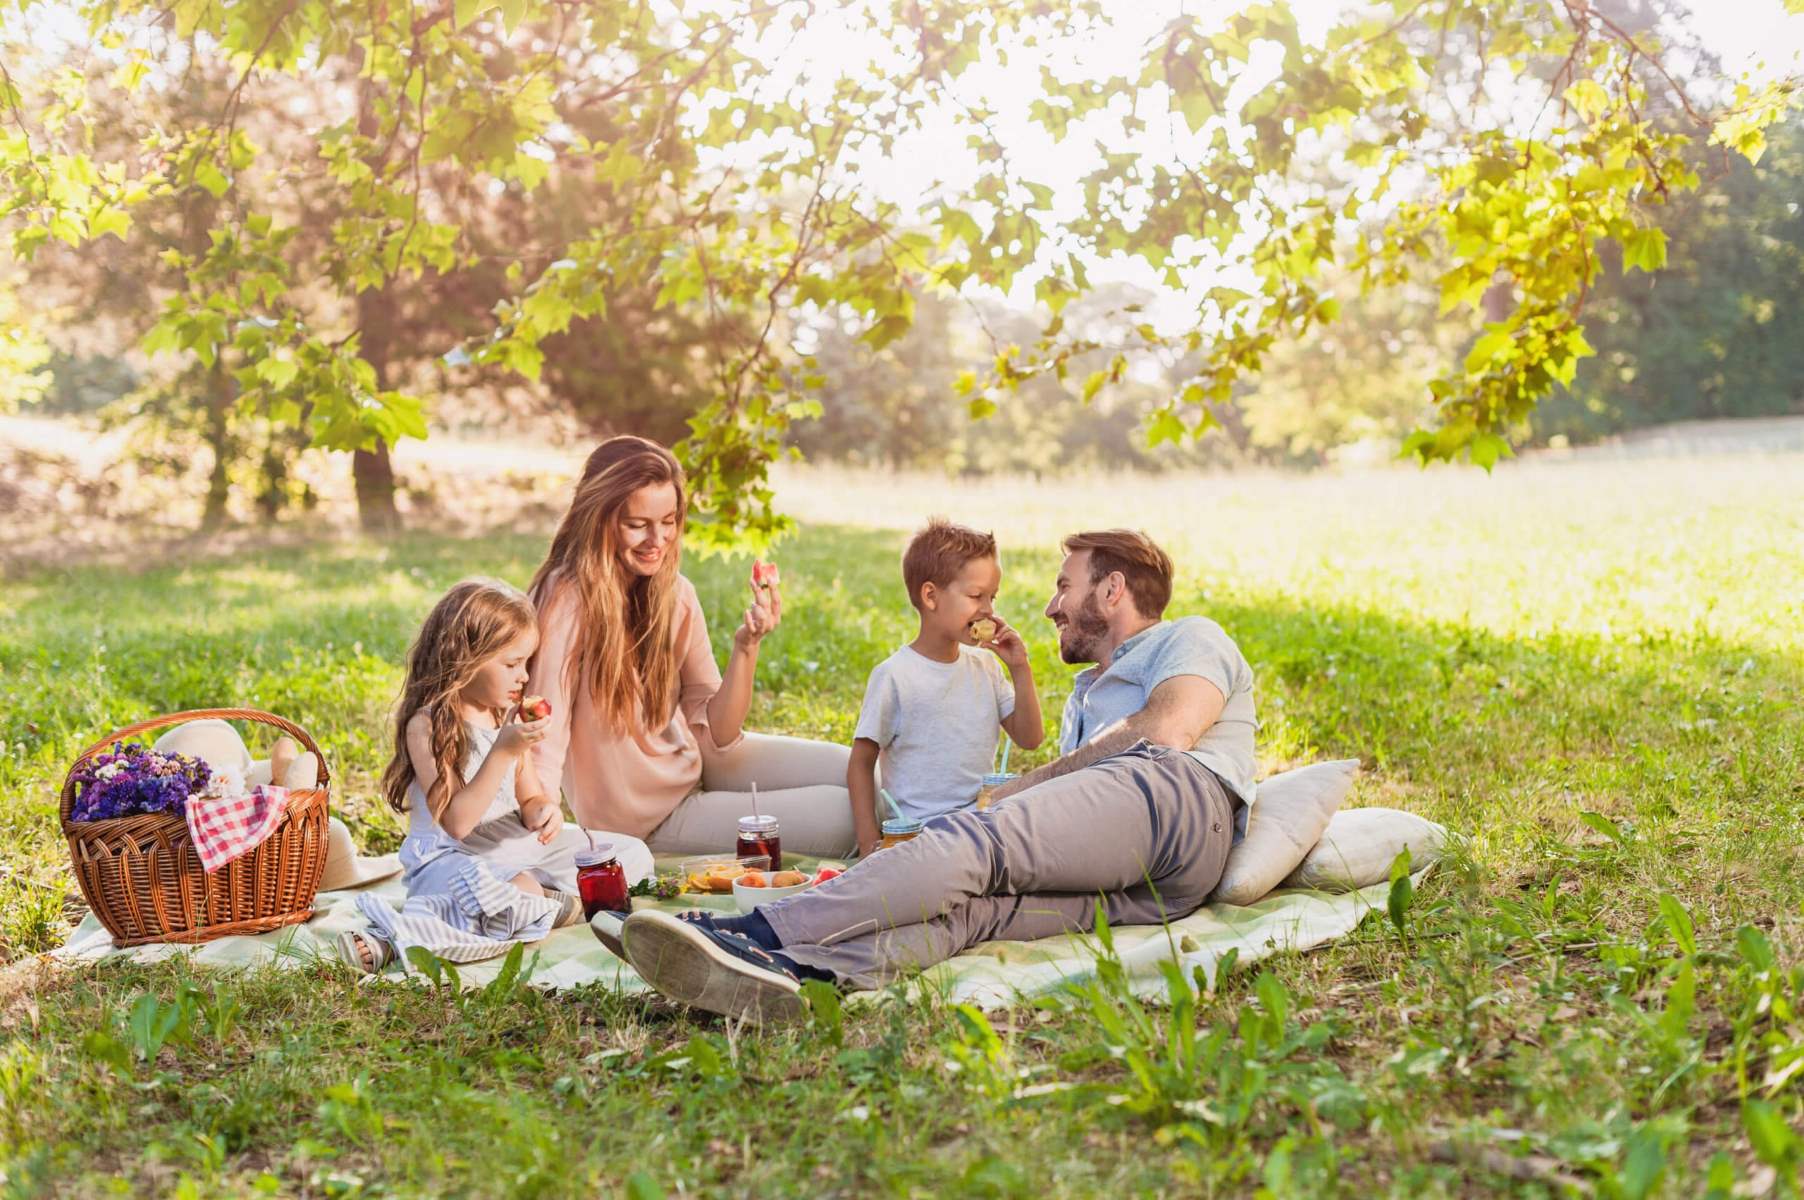 15-facts-about-national-picnic-day-april-23rd